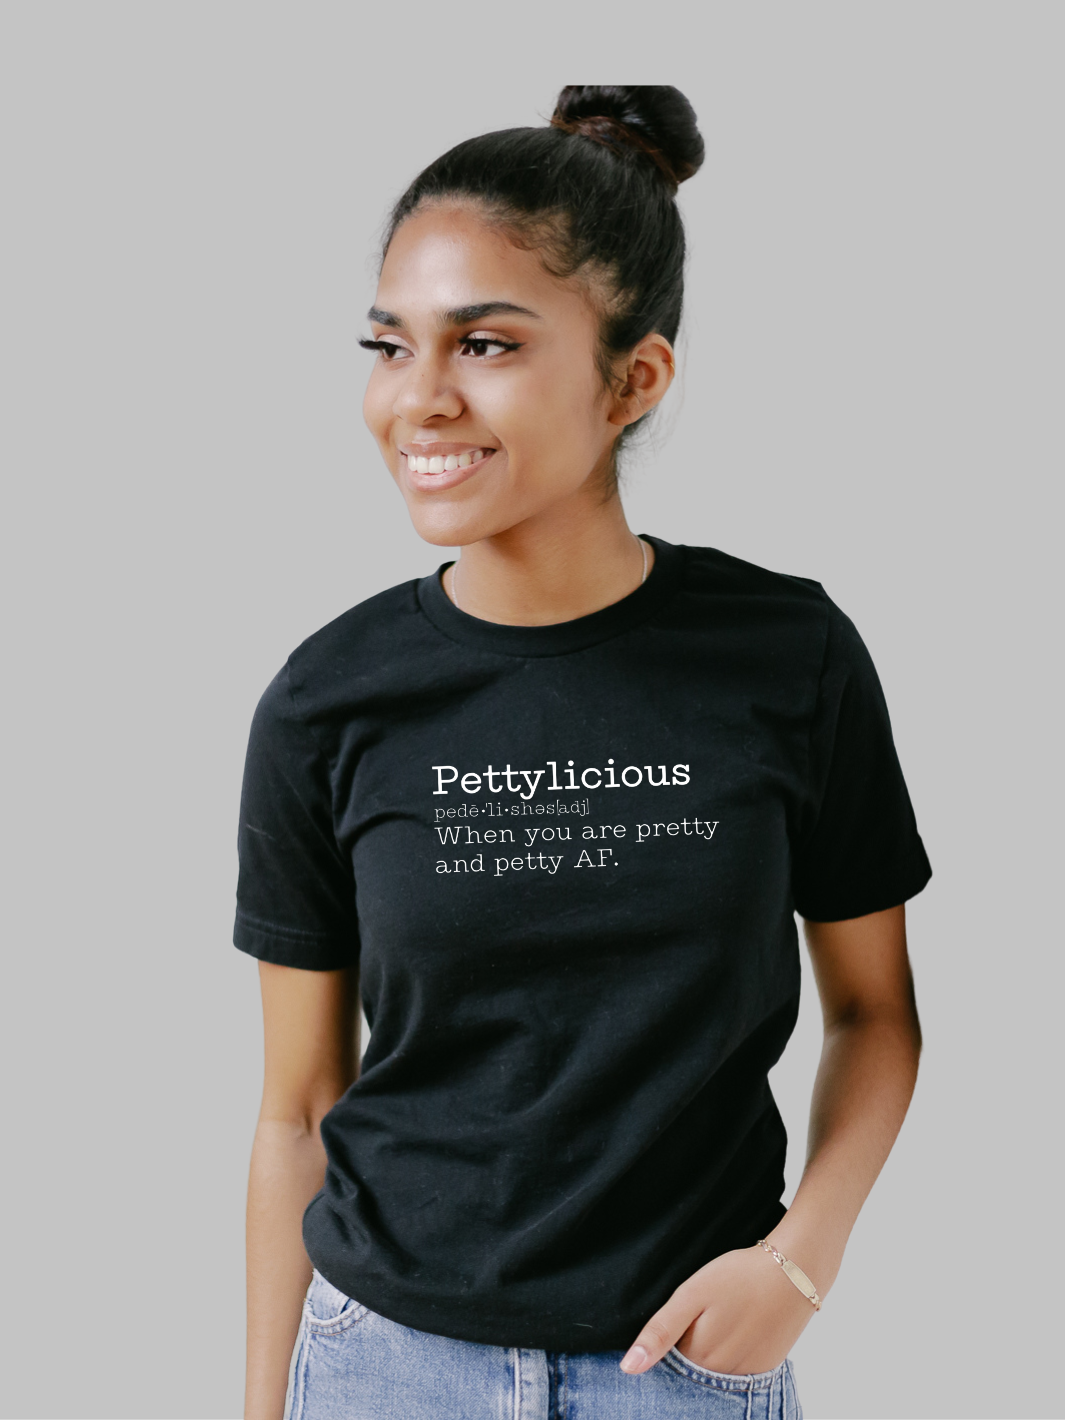 Image of a black unisex crewneck t-shirt featuring the word 'Pettylicious' in a classic white typewriter font. The playful and bold text contrasts sharply against the crisp white background of the shirt, creating a striking visual effect. The typewriter font adds a vintage, yet modern, flair to the design, emphasizing the quirky and humorous nature of the message. Sarcastic t-shirt, Petty T-shirt